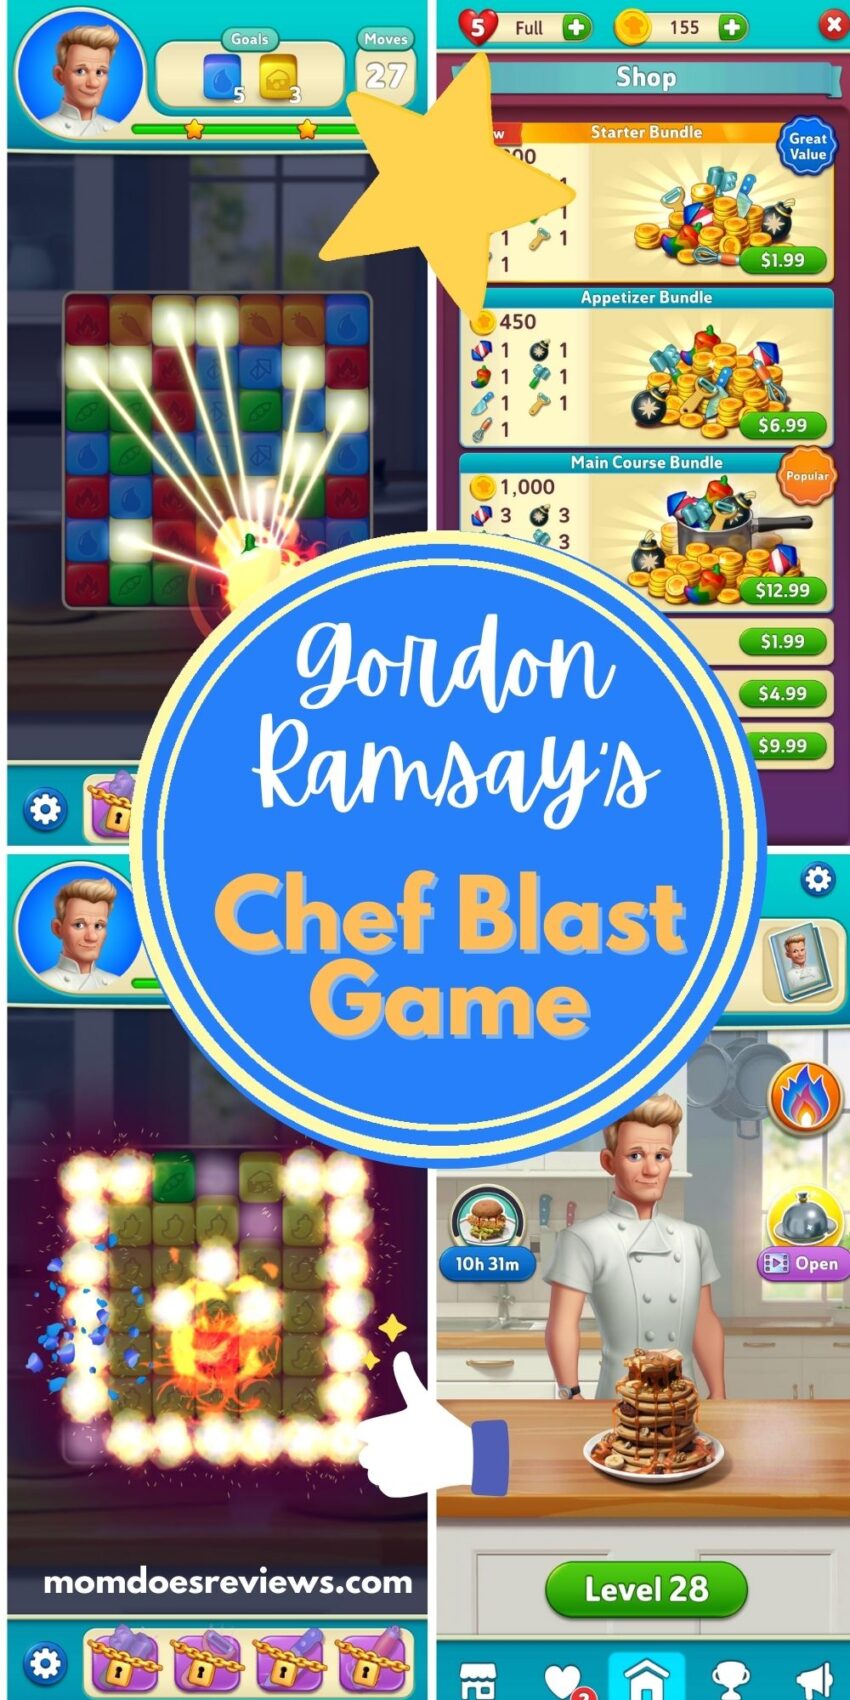 Play Gordon Ramsay's Chef Blast Mobile Game- Inspired by Culinary Genius!